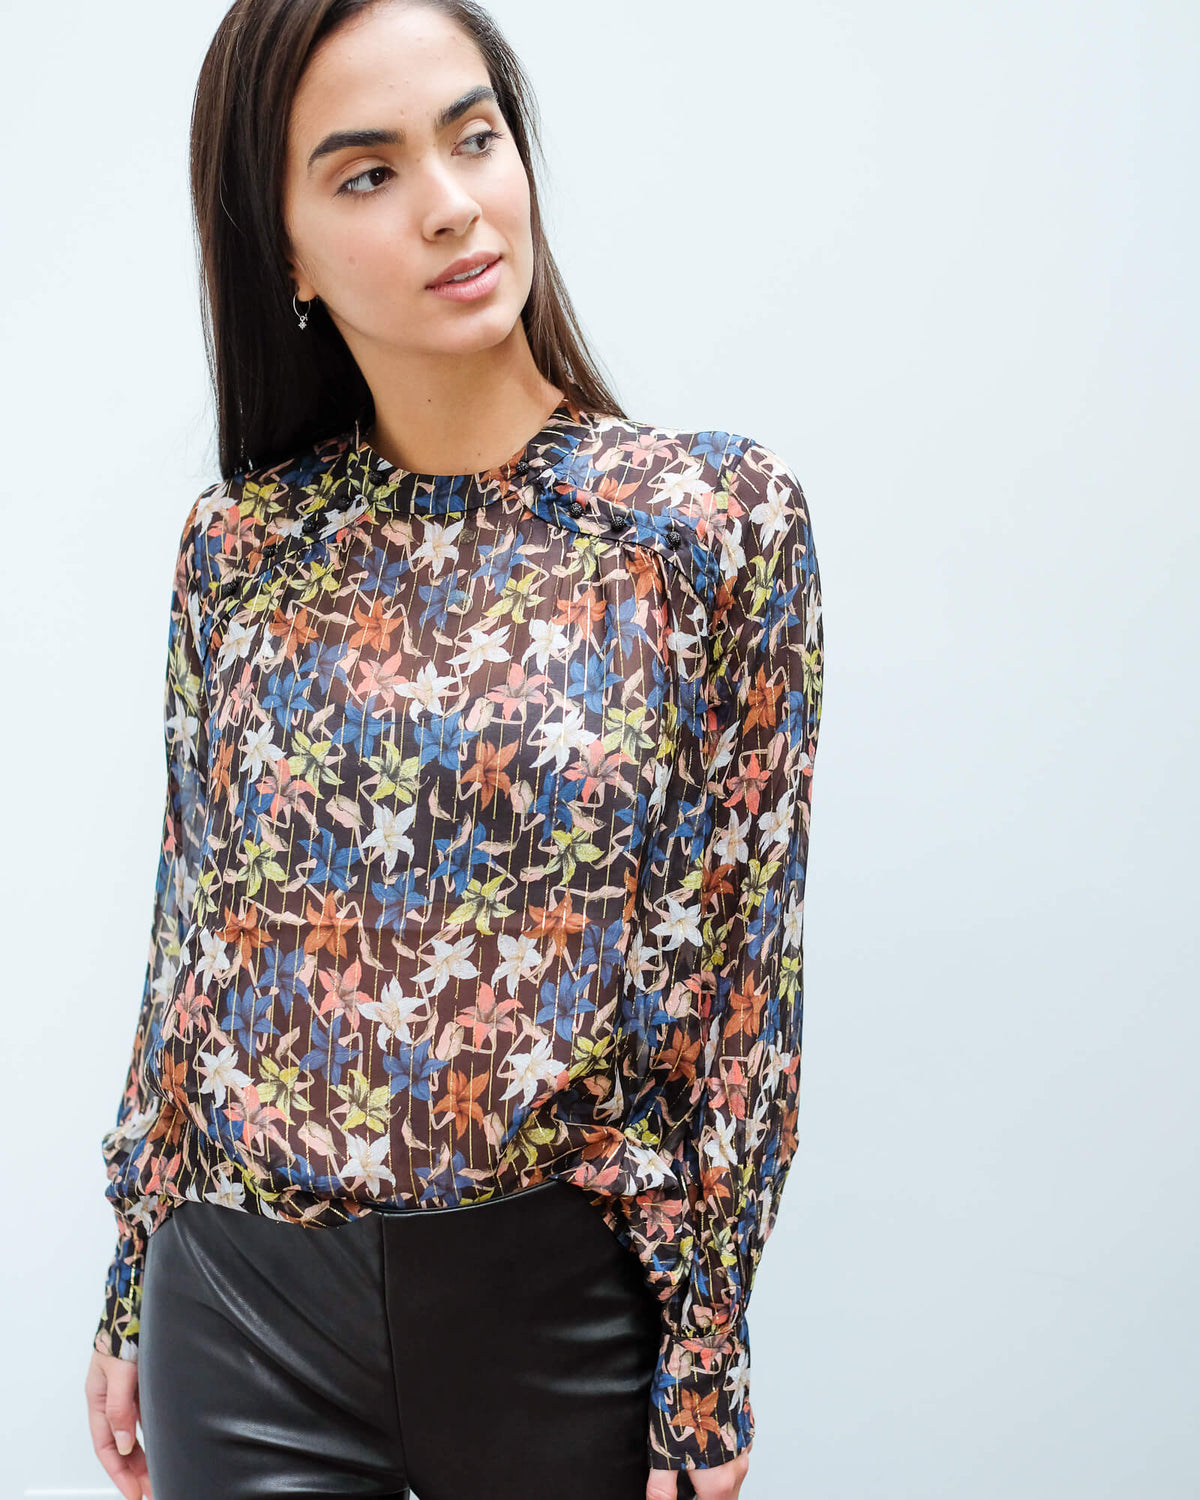 M Kickoff floral blouse in black